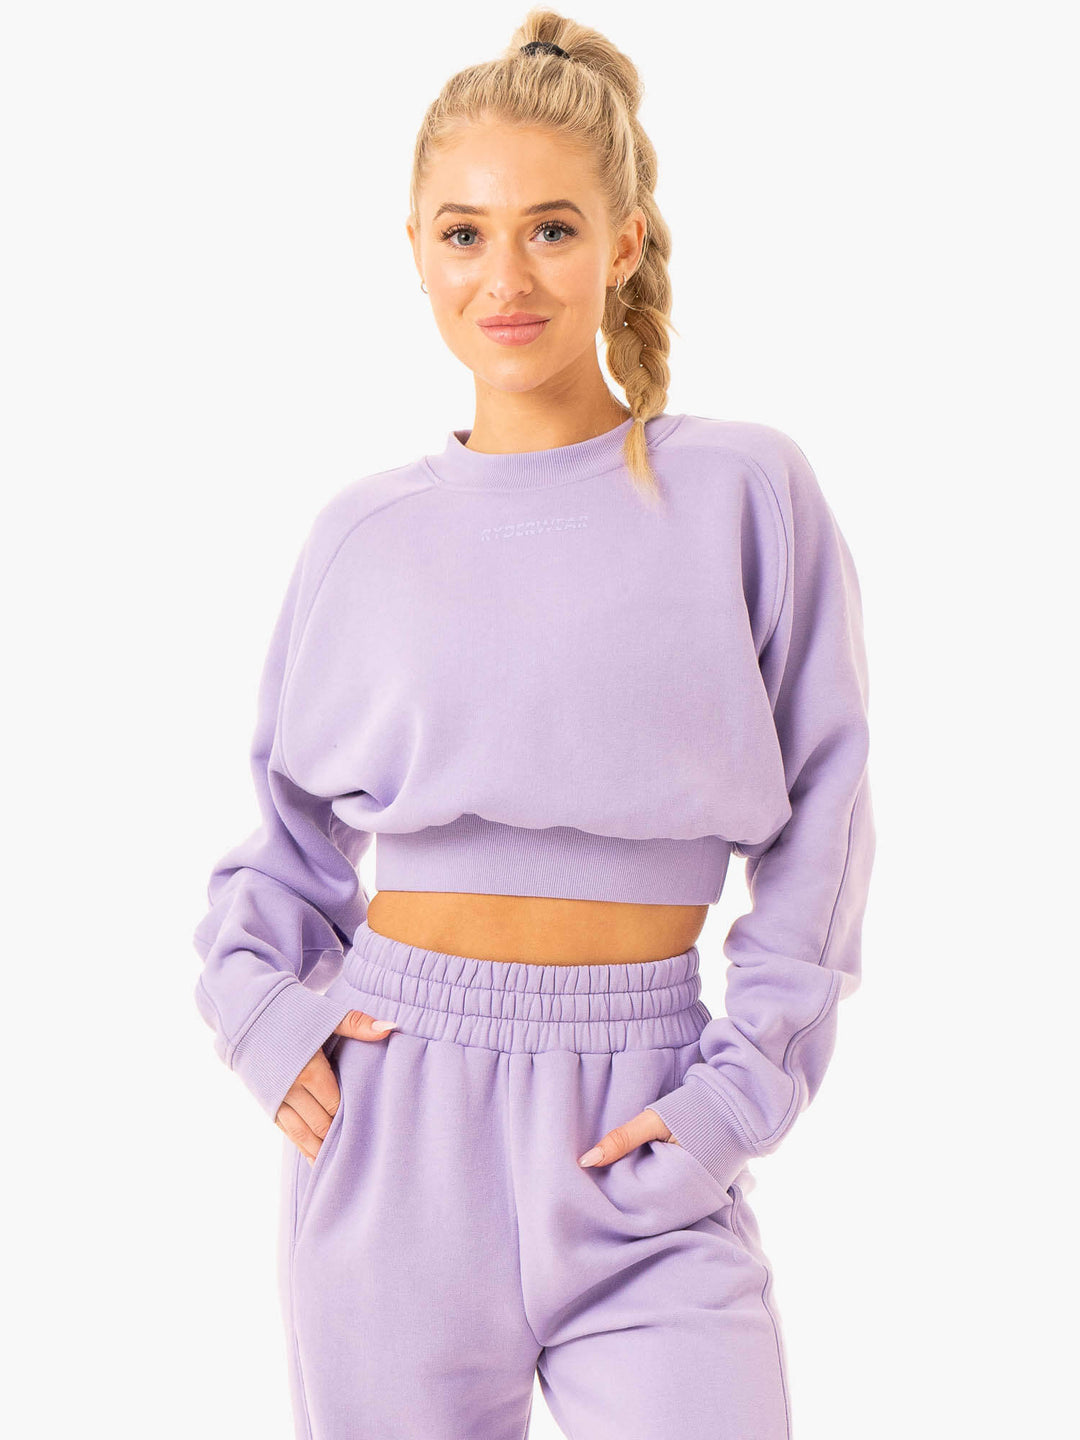 Sideline Sweater - Lilac Clothing Ryderwear 